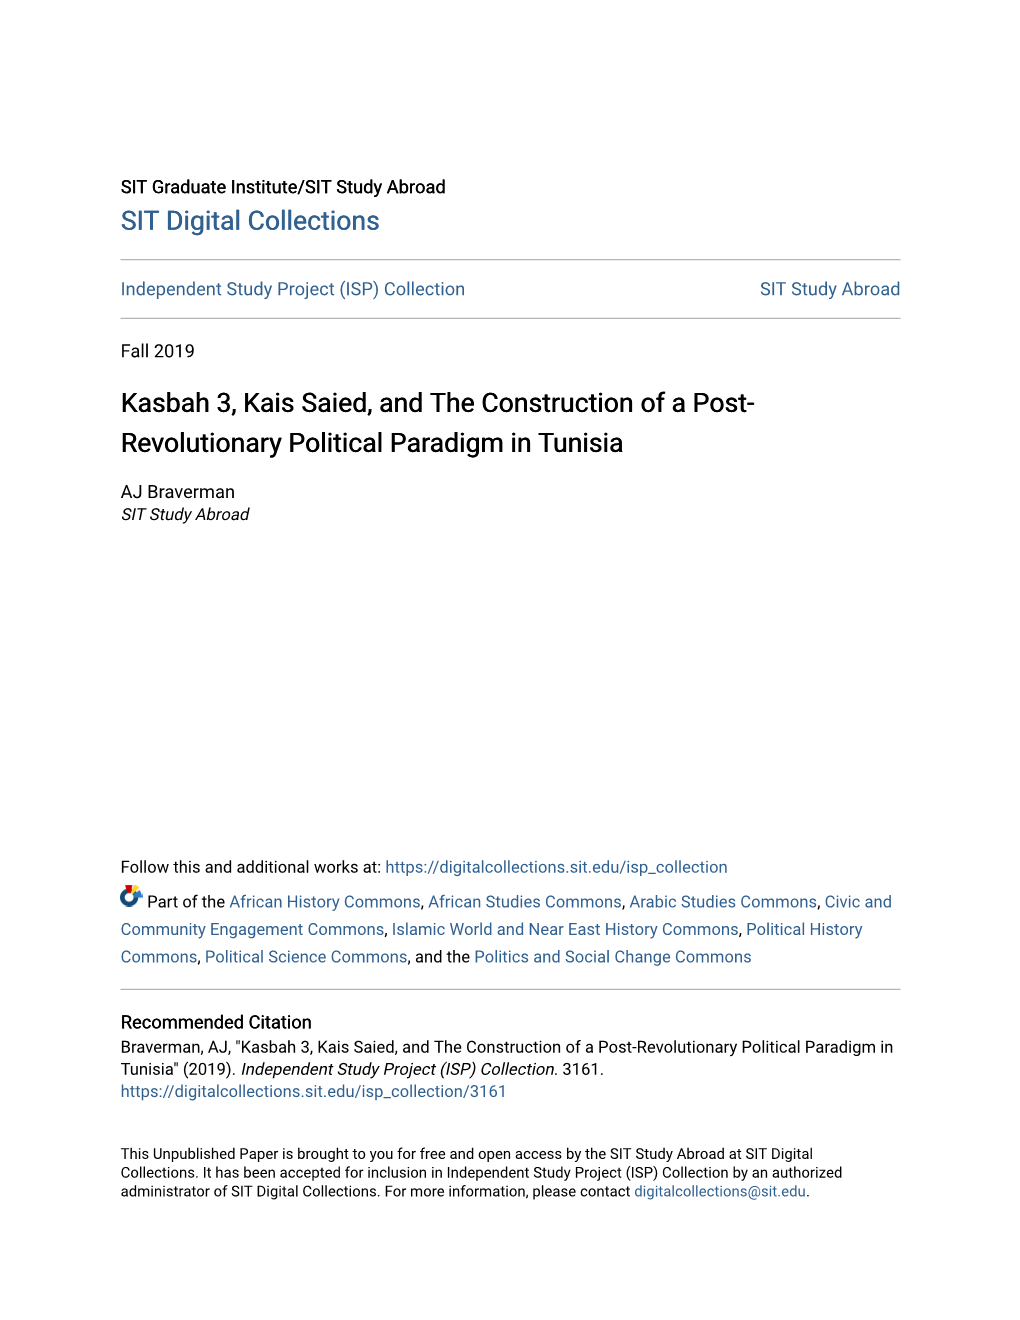 Kasbah 3, Kais Saied, and the Construction of a Post- Revolutionary Political Paradigm in Tunisia